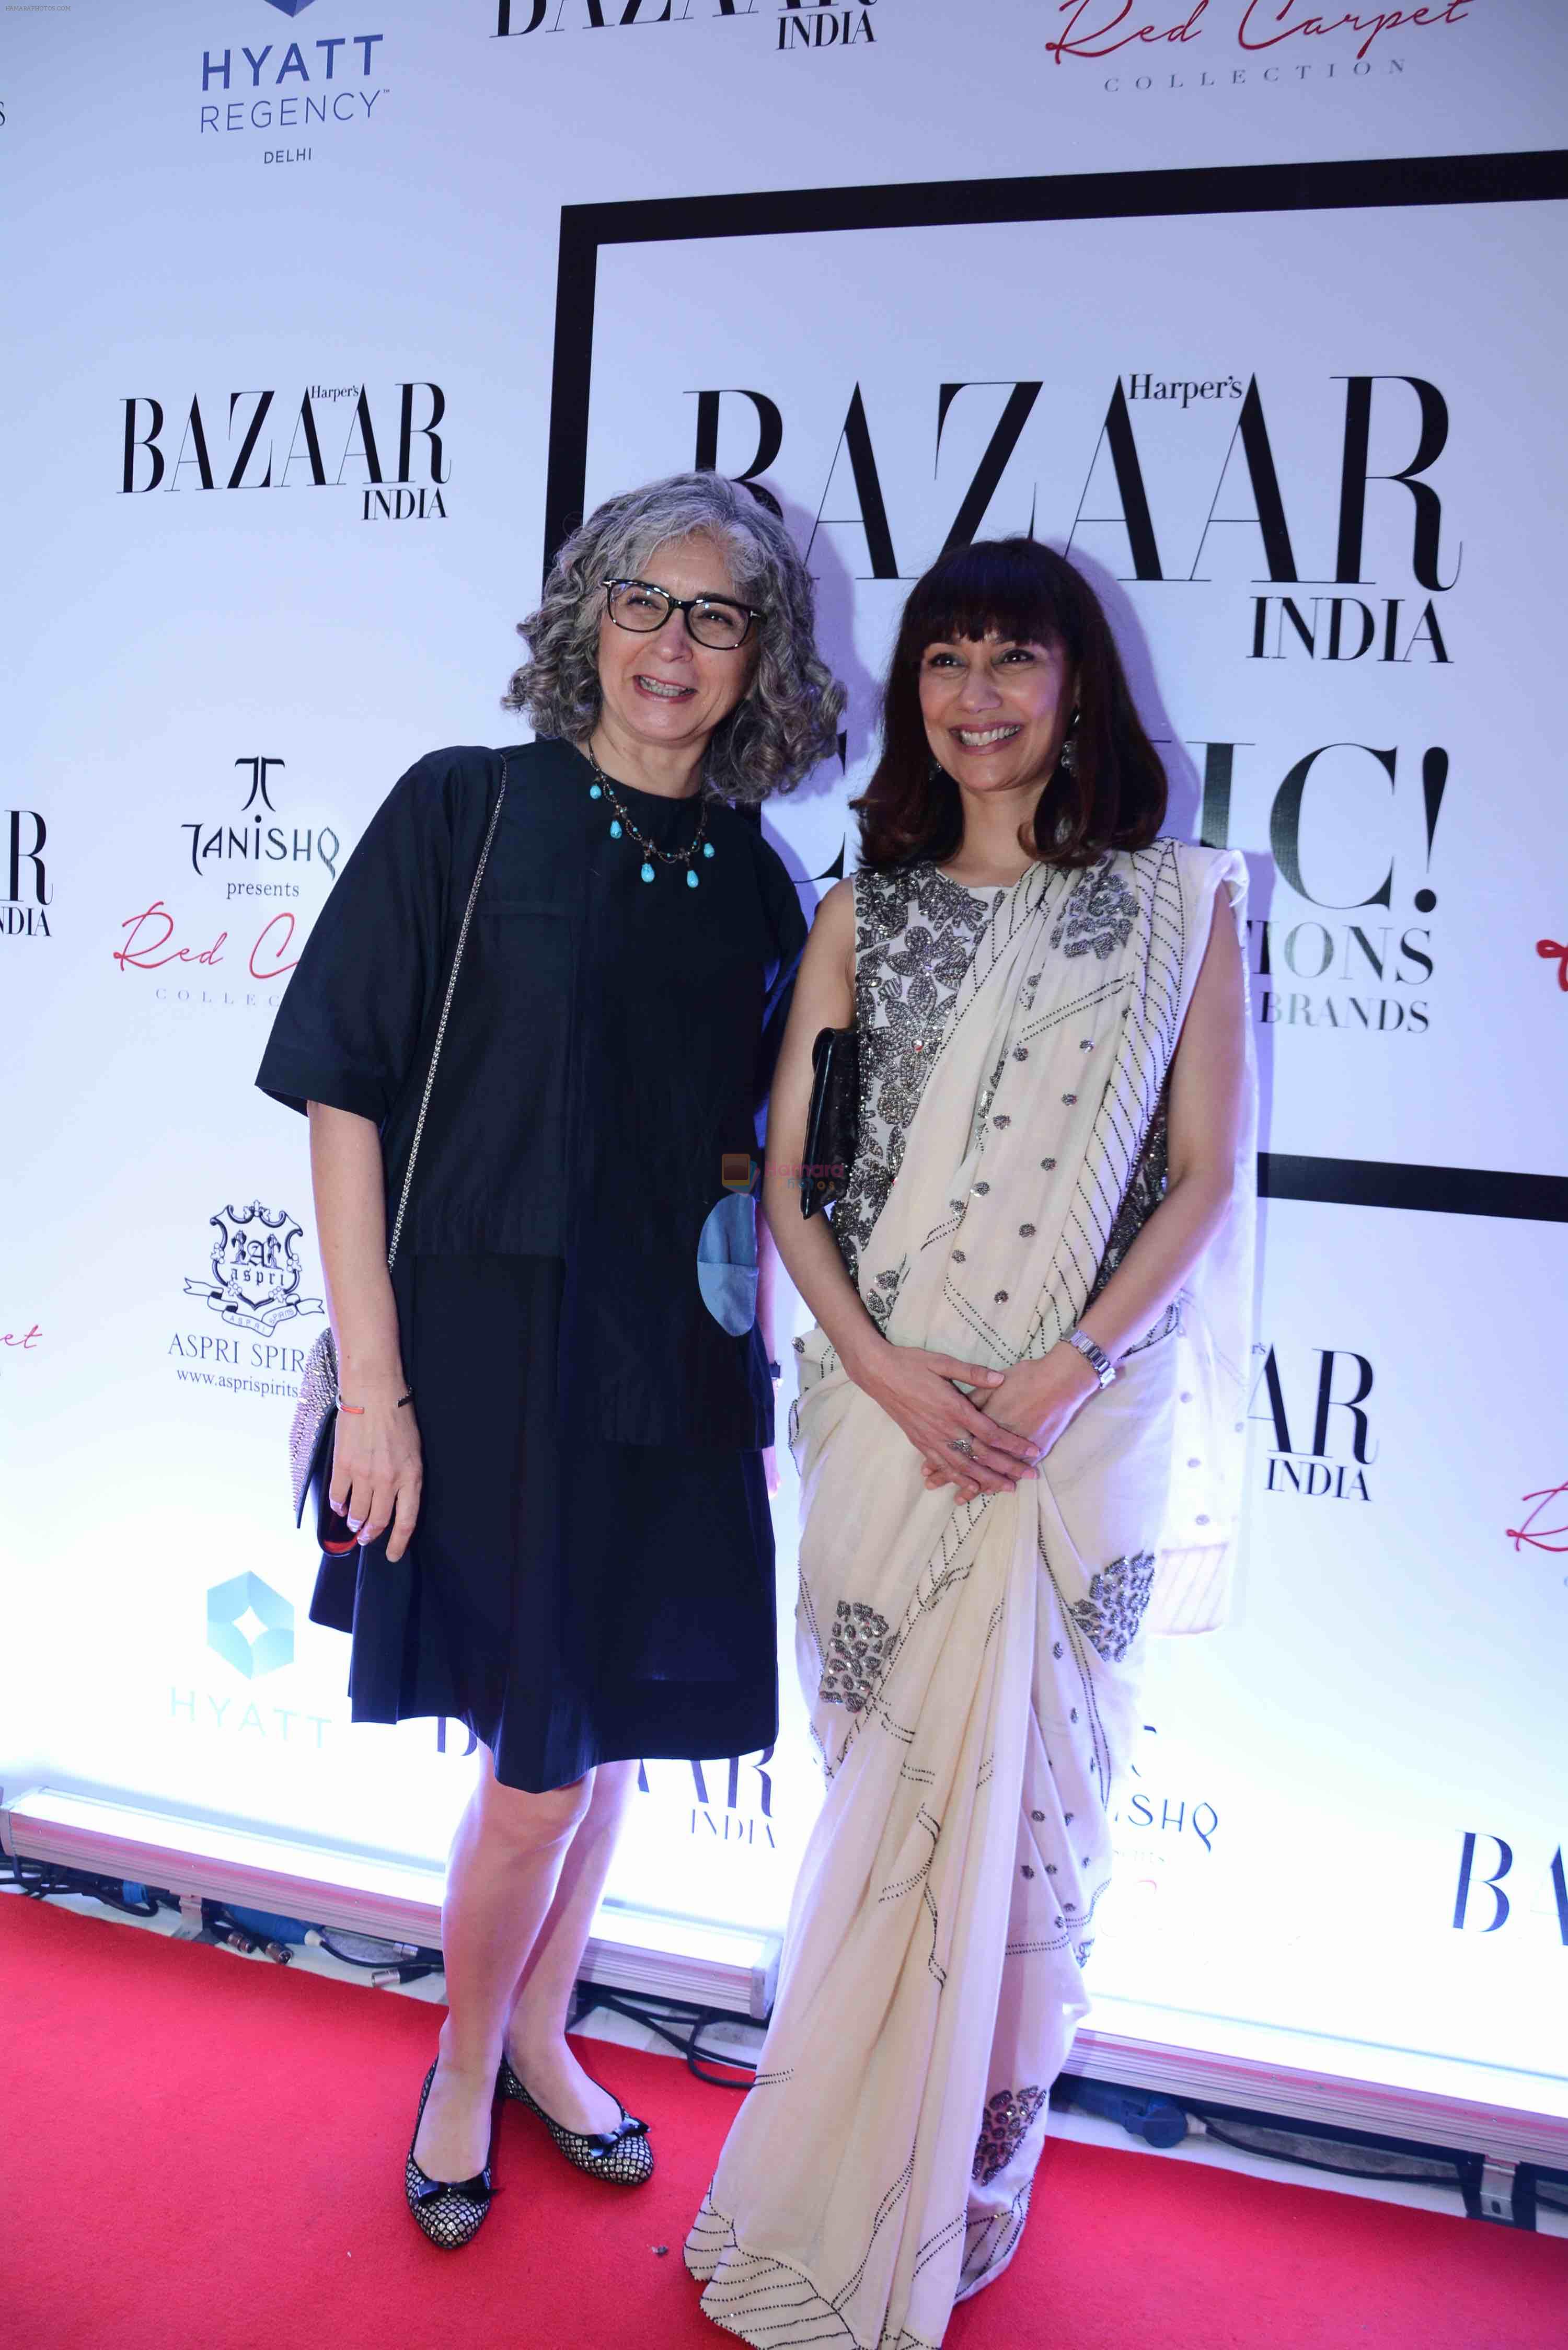 Archana Jain and Harper's Bazaar editor Nonita Kalra at the launch of The Iconic Book in Delhi on 10th May 2017